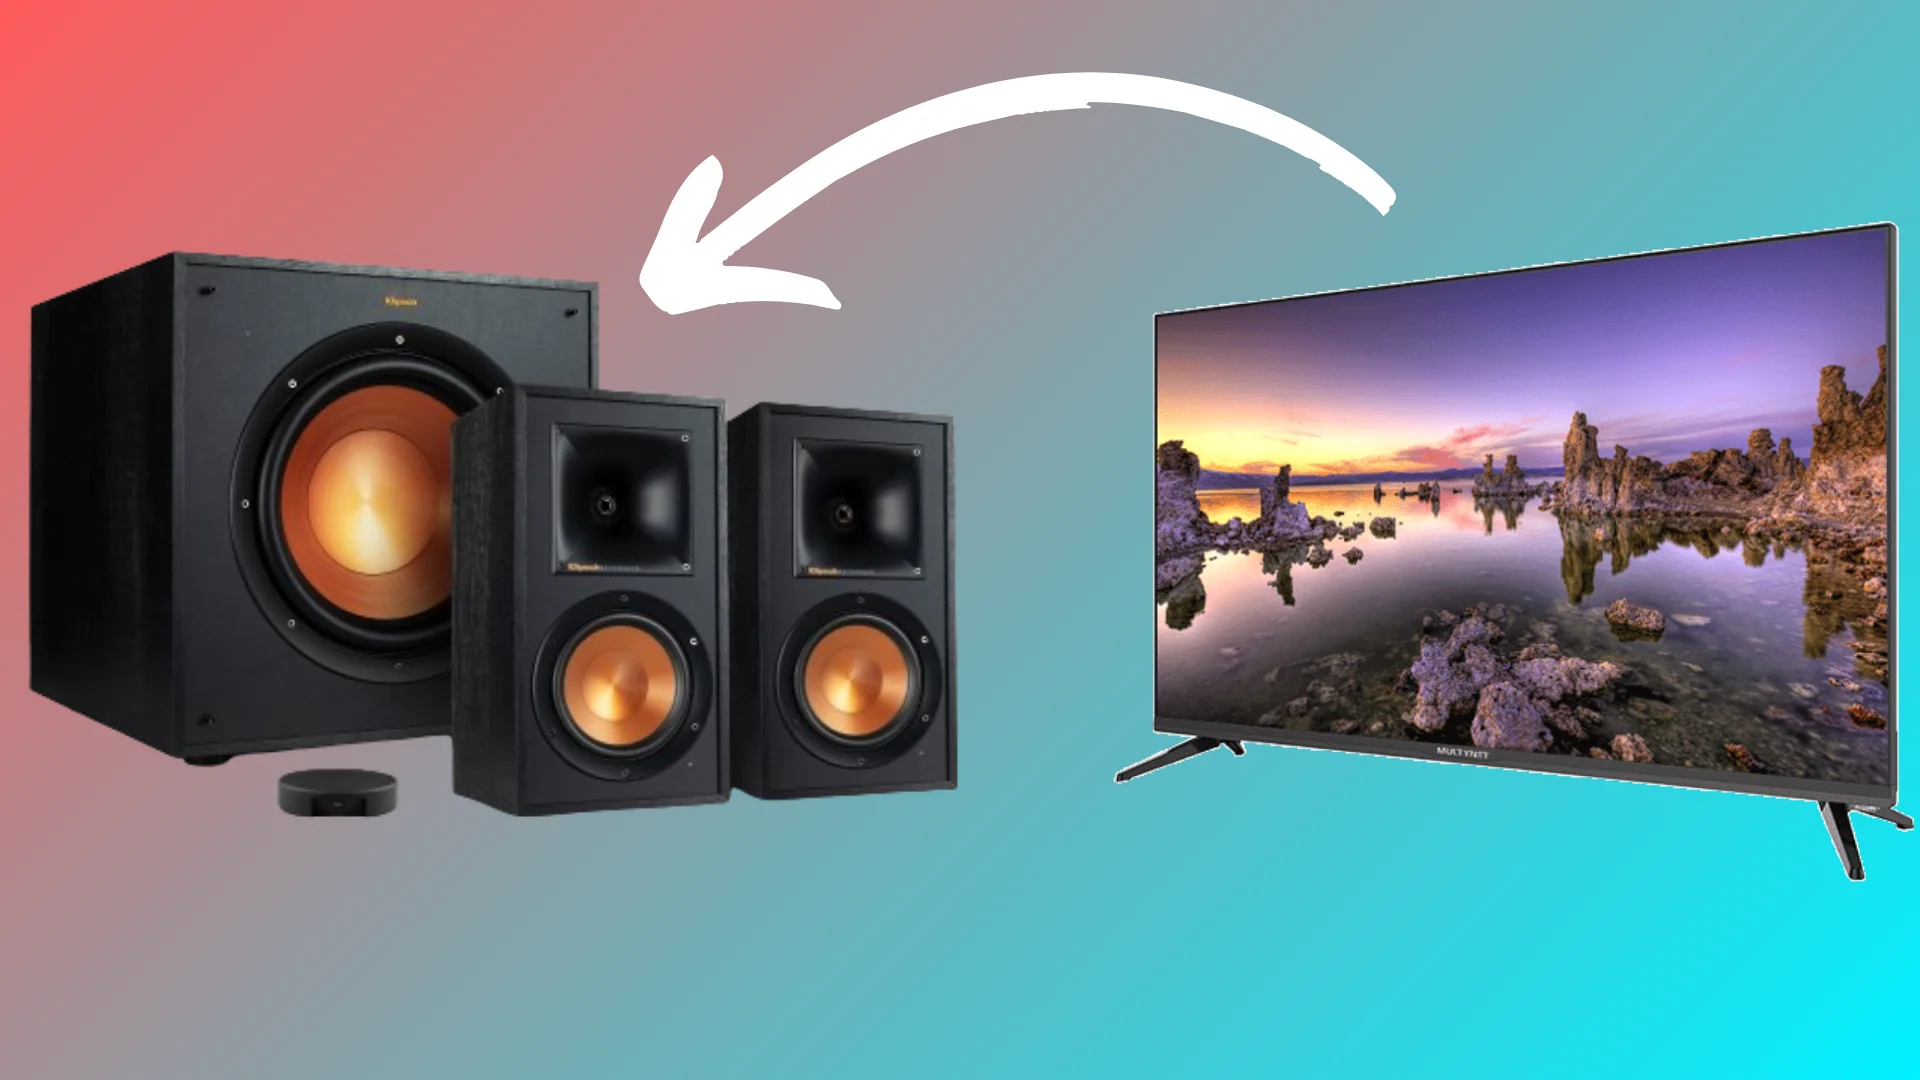 How To Hook up Klipsch Speakers To TV (Guide)